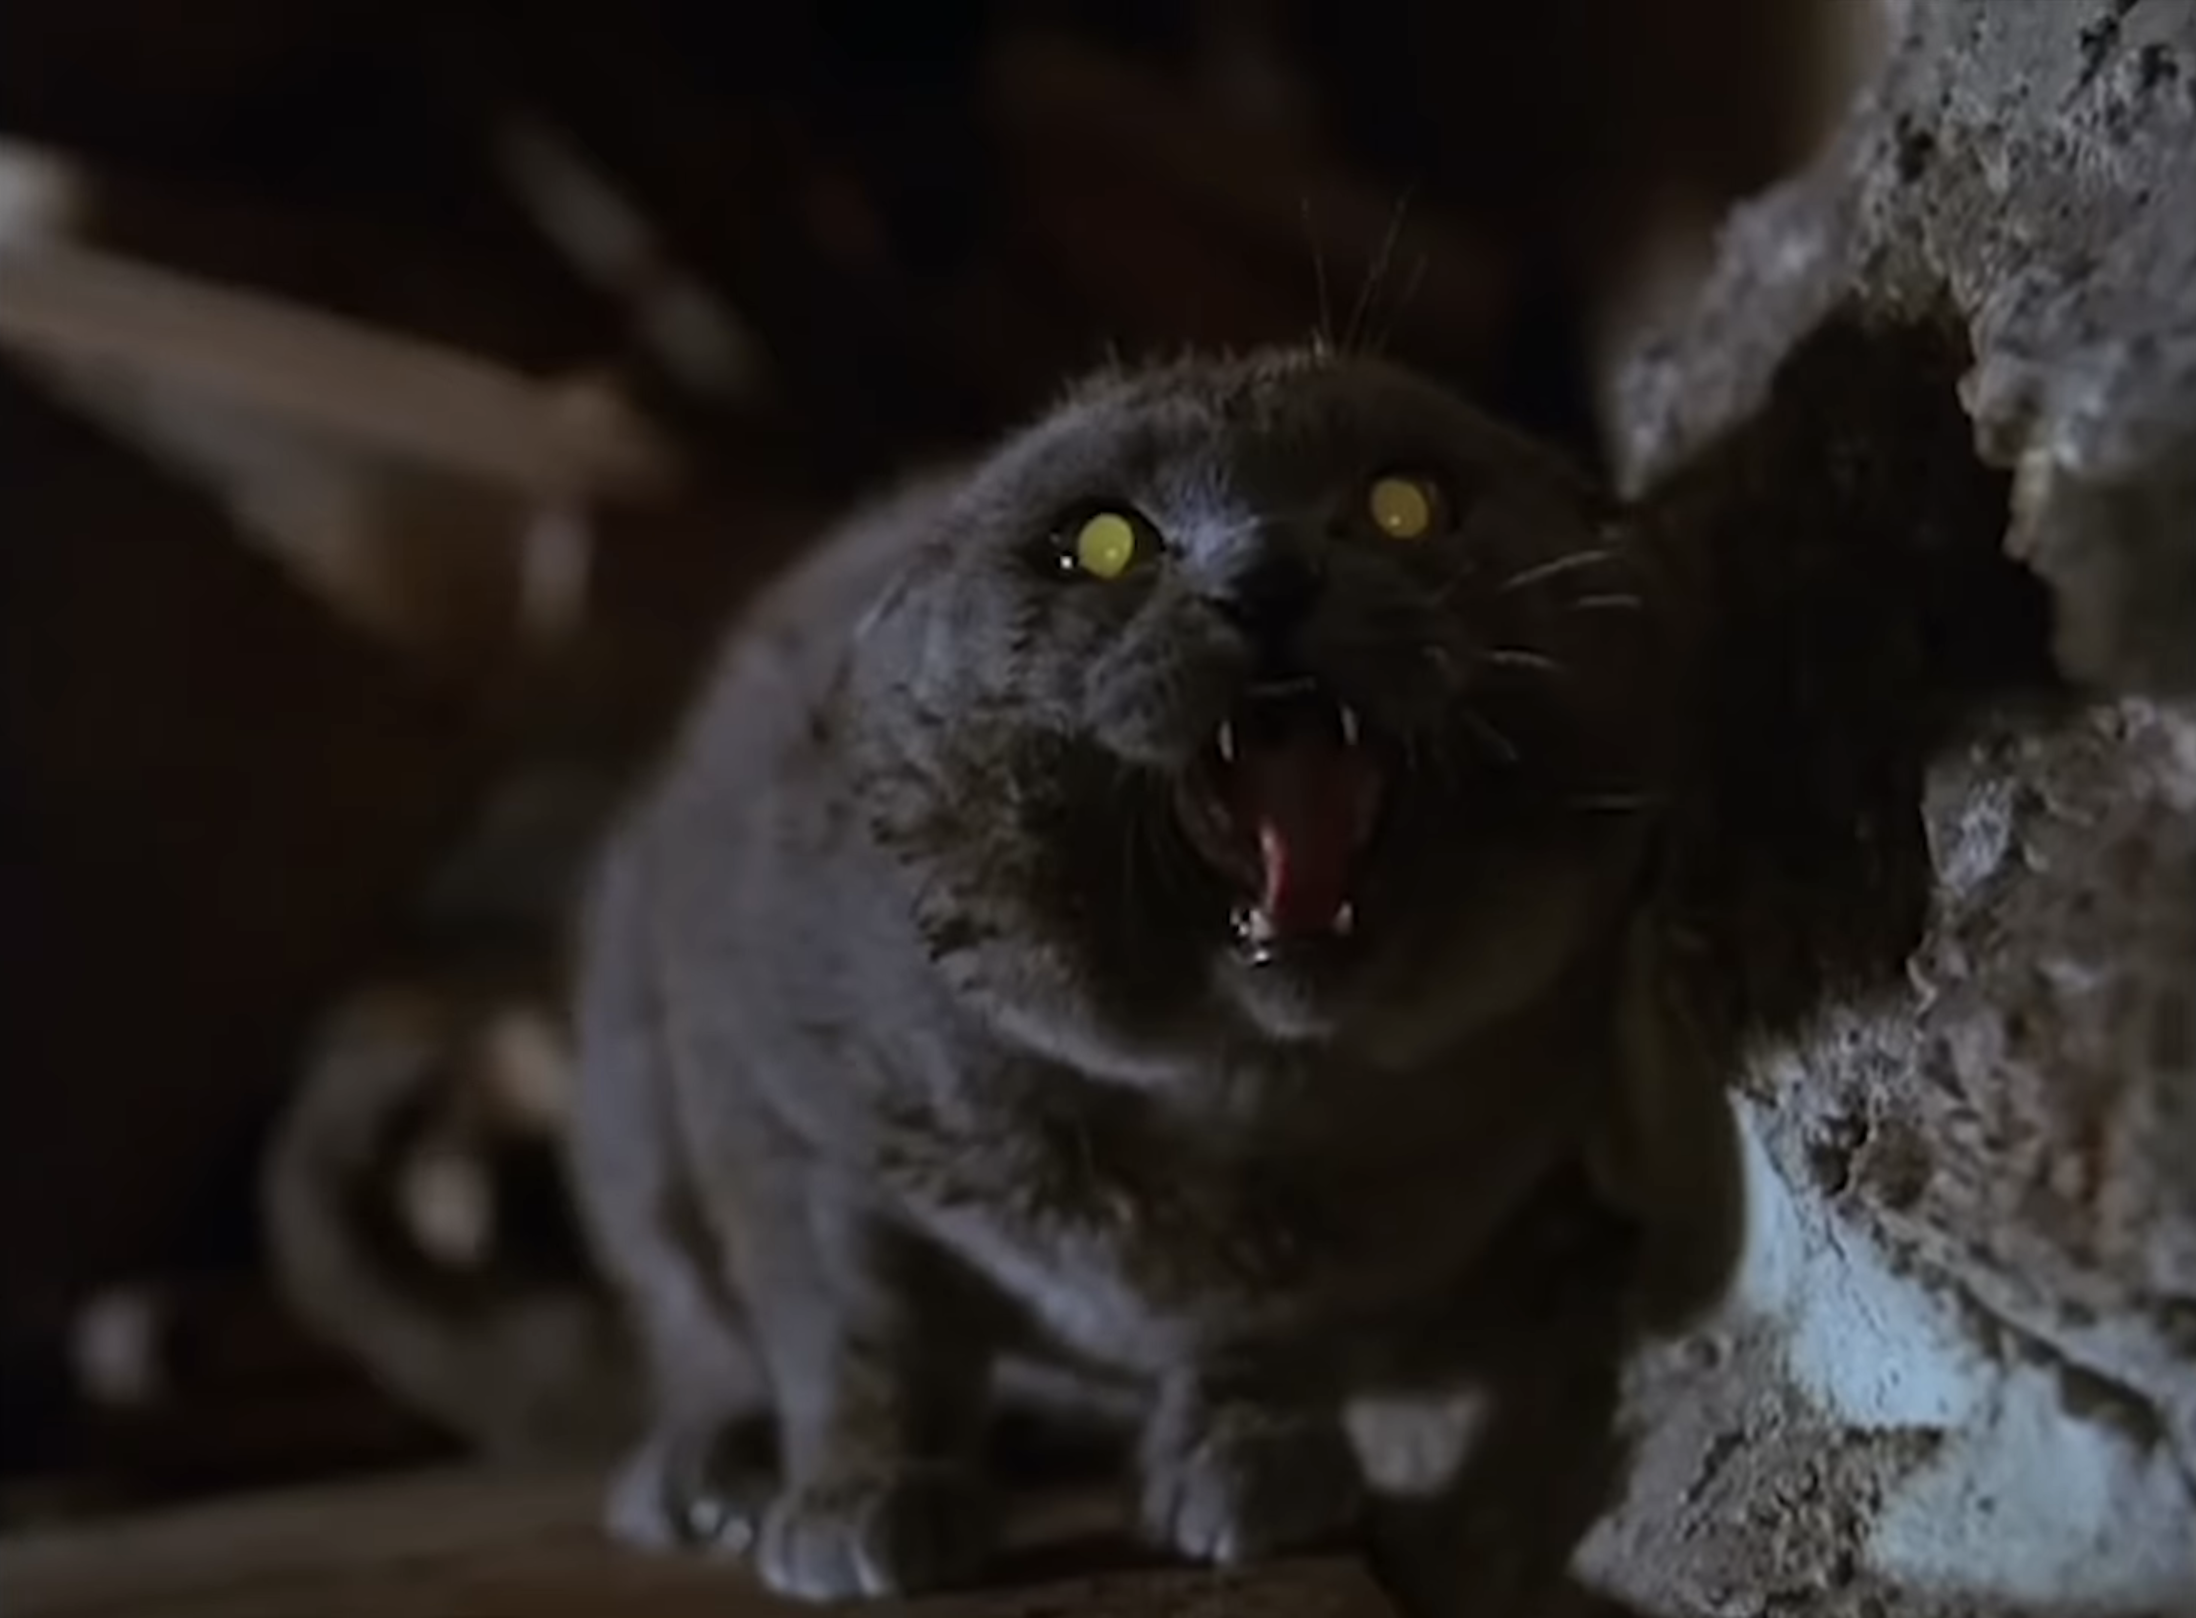 A cat with yellow eyes yowling at someone offscreen